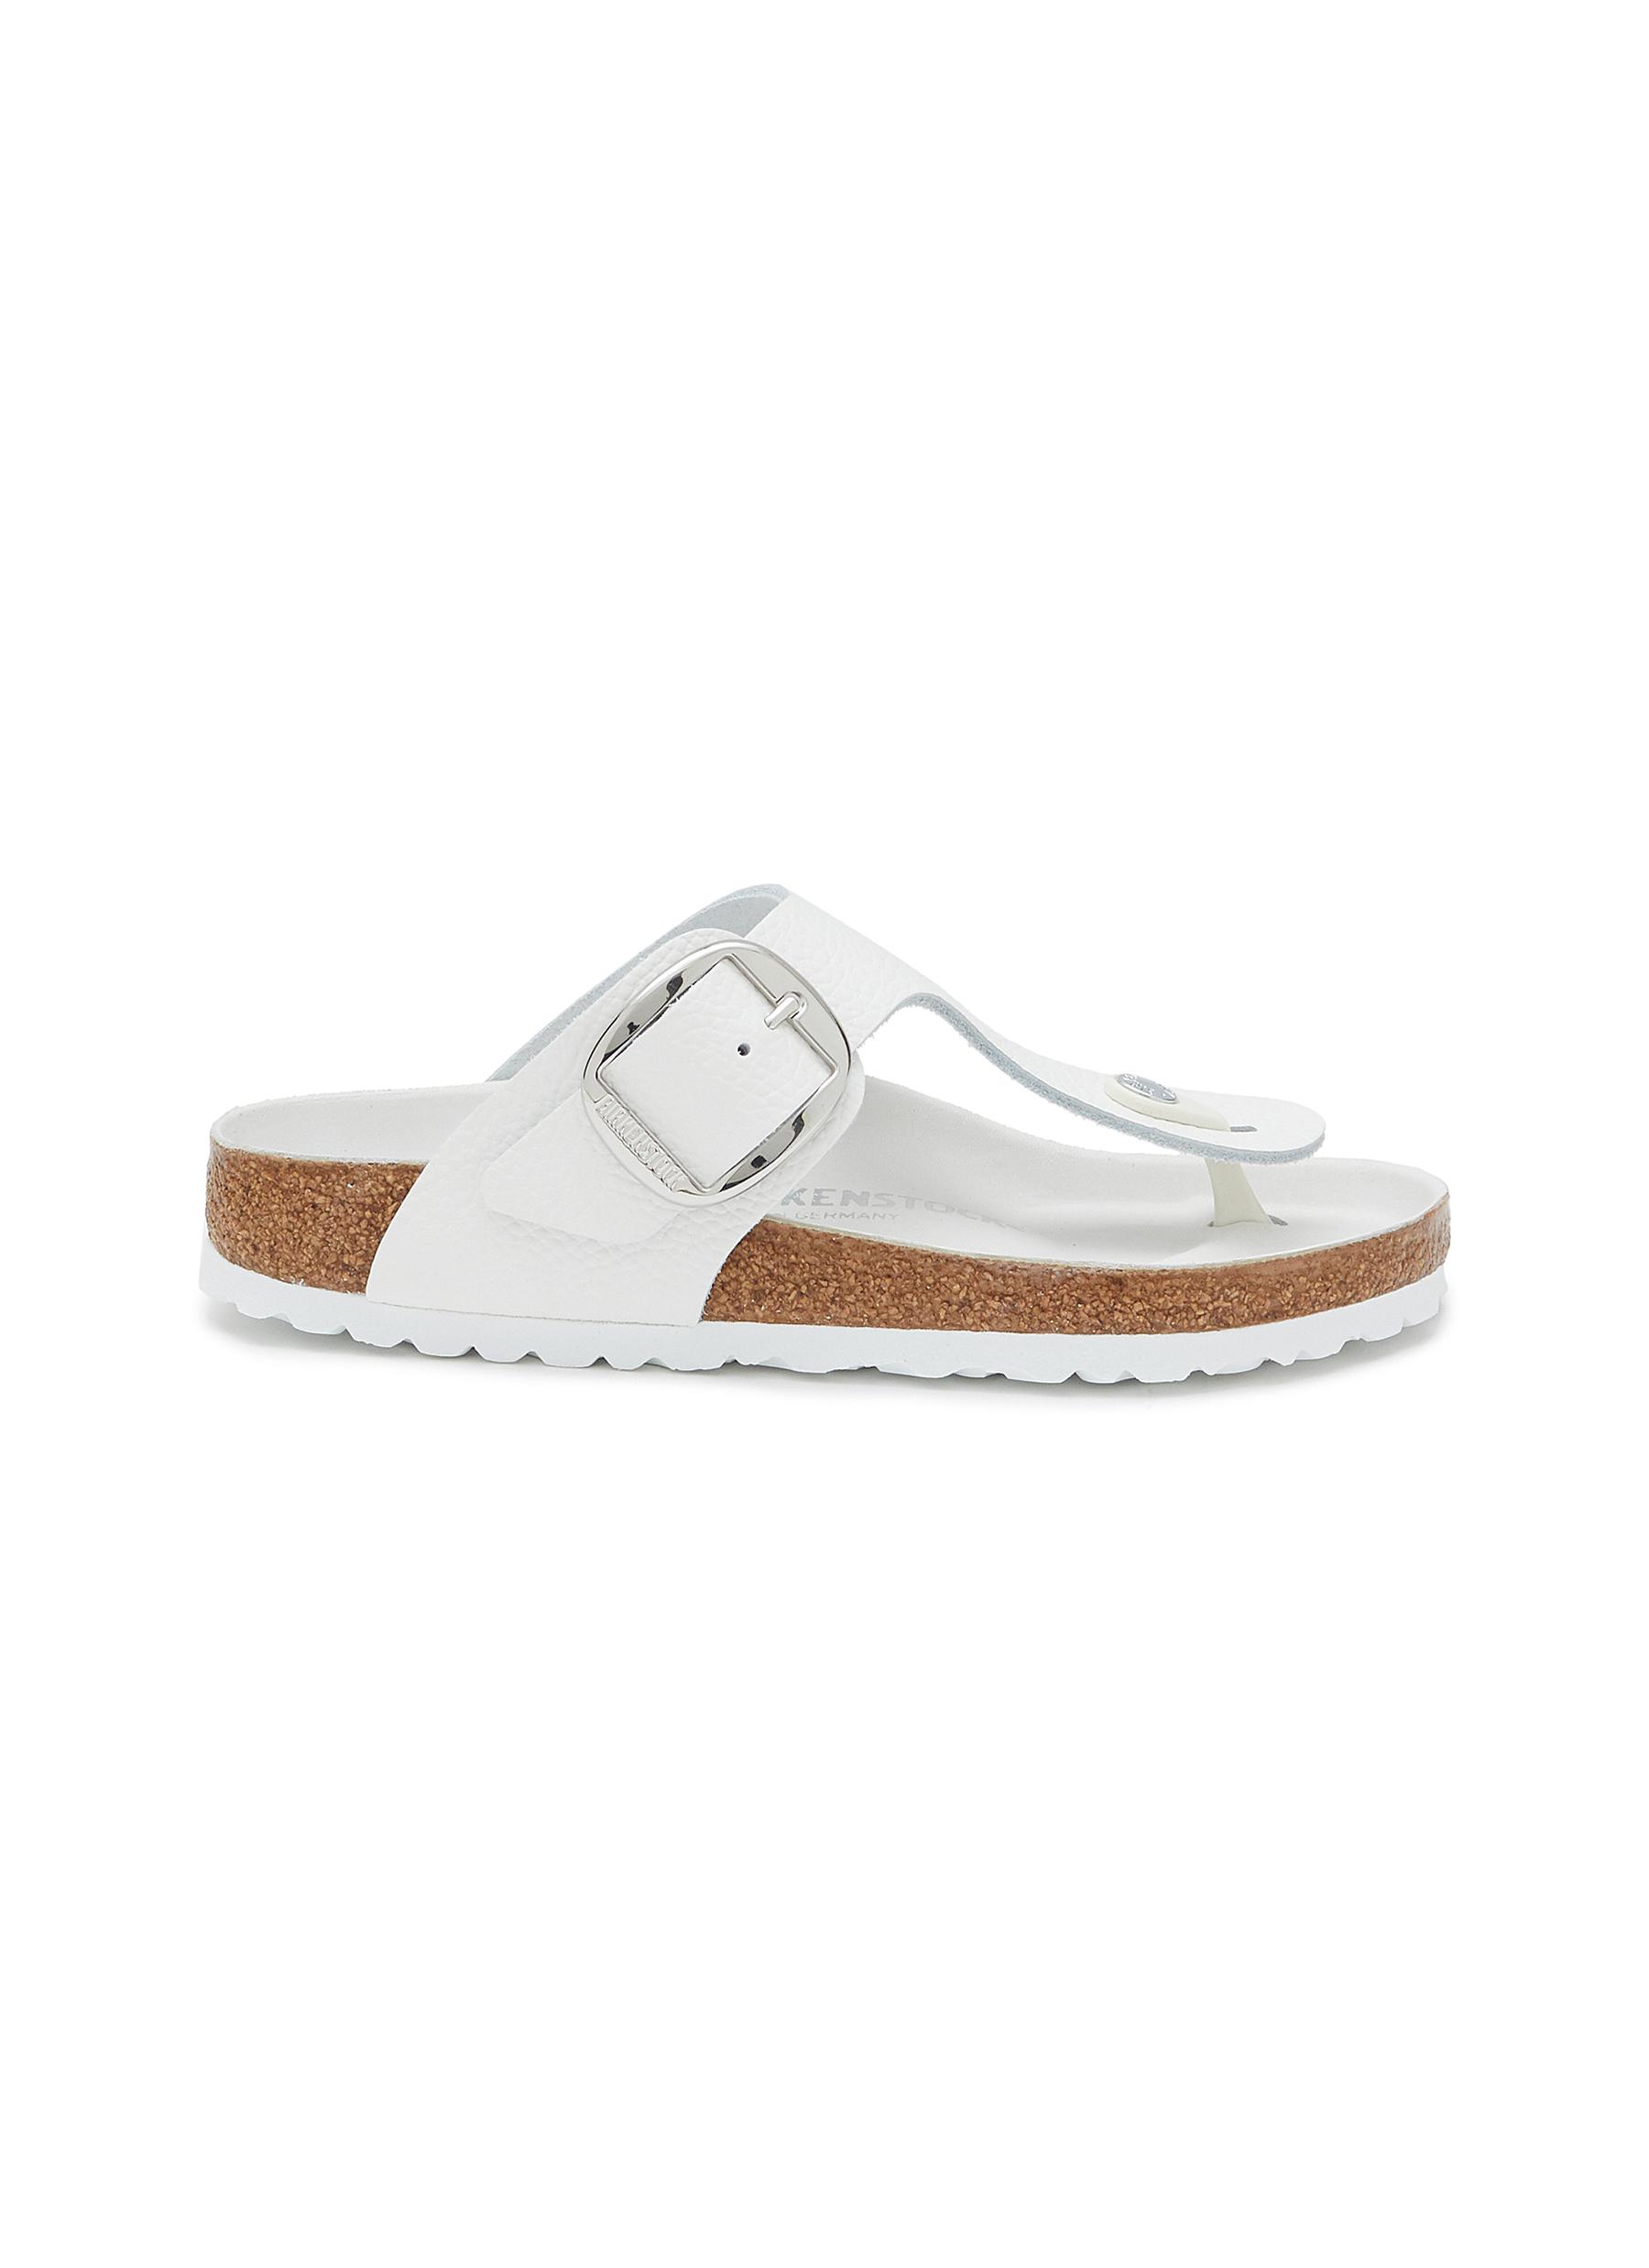 ‘Gizeh' Grained Leather Thong Sandals